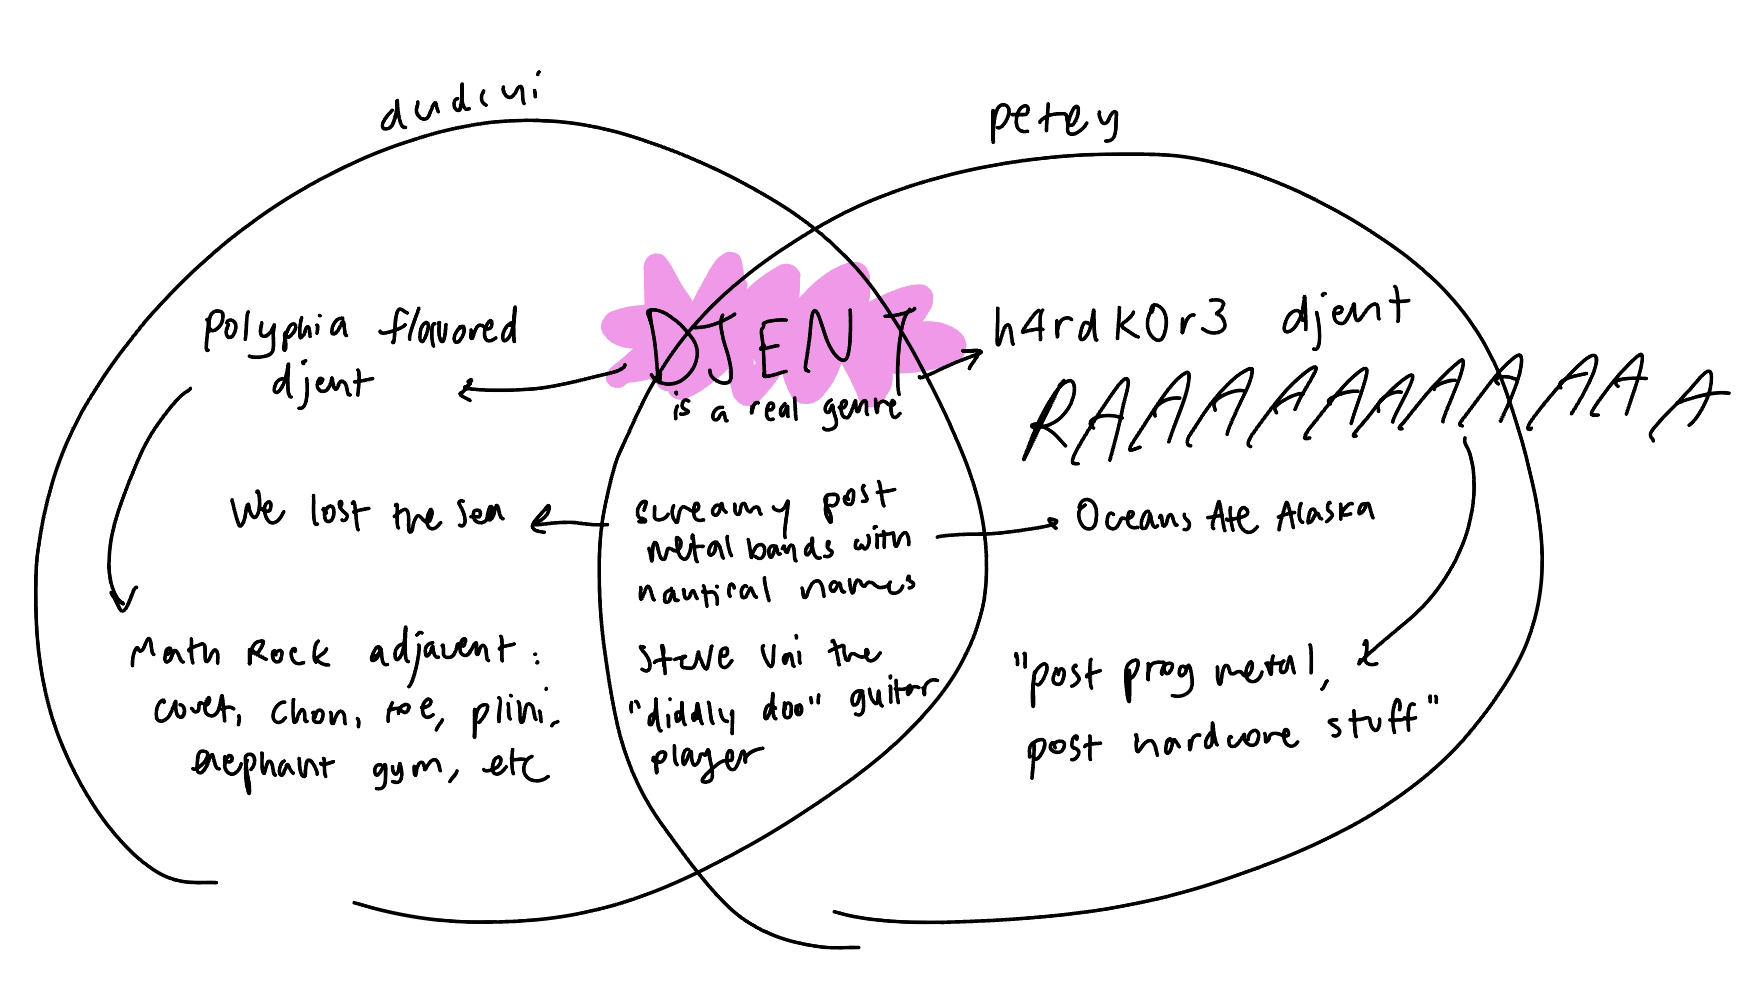 venn diagram where audrey's side reads: polyphia flavored djent, we lost the sea, math rock adjacent. intersection reads djent is a real genre, screamy post metal bands with nautical names, steve vai the 'diddly doo' guitar player. petey's side reads hardcore djent, RAAAAAA, oceans ate alaska, post prog metal, post hardcore stuff